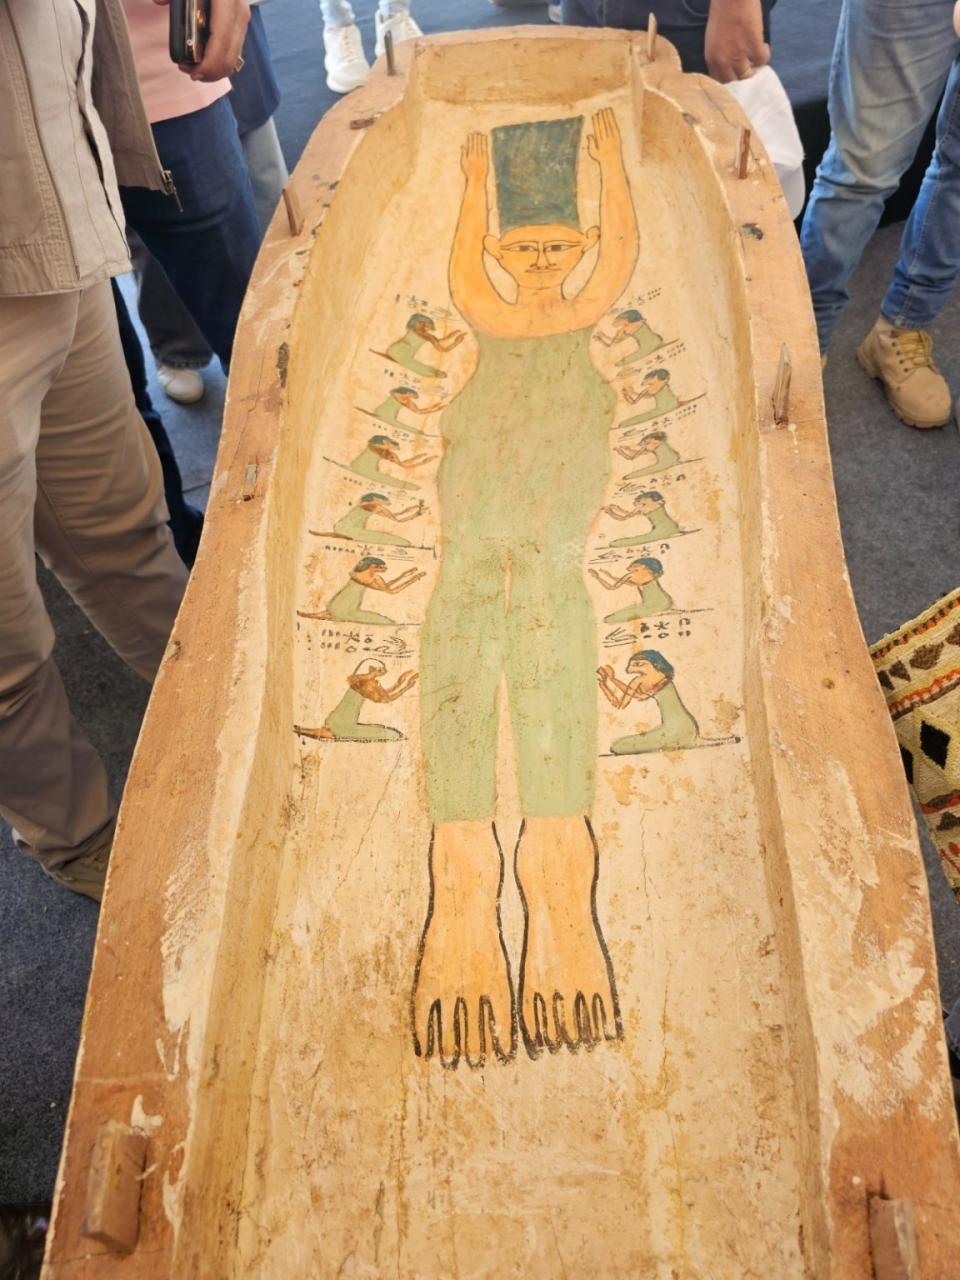 The coffin features an outline of a person with several kneeling figures beside it